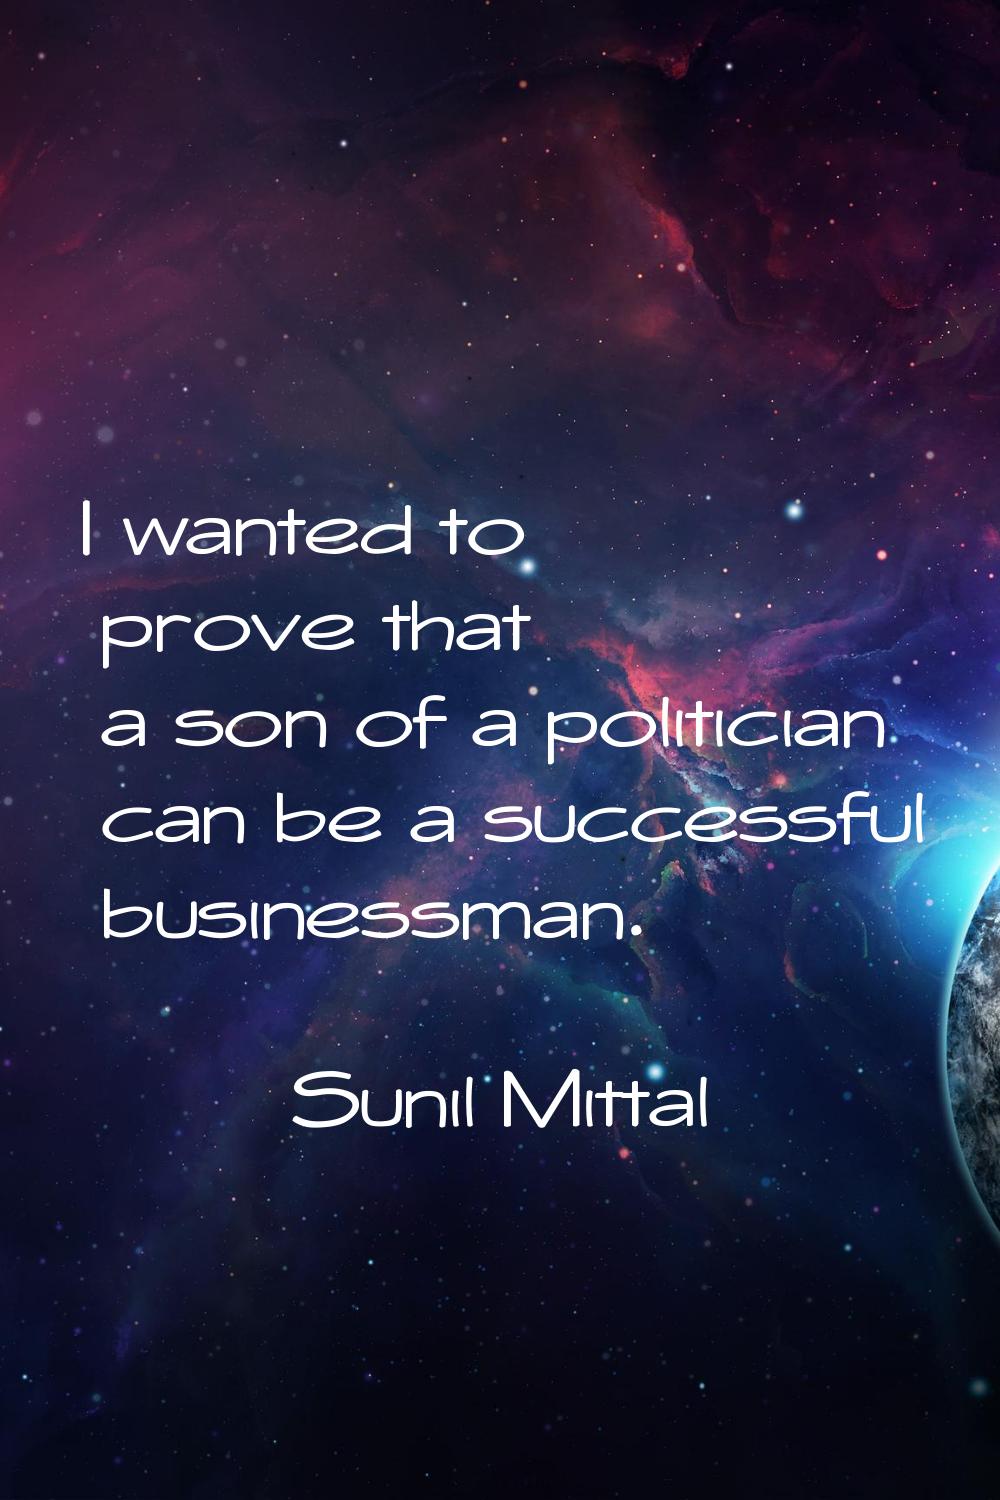 I wanted to prove that a son of a politician can be a successful businessman.